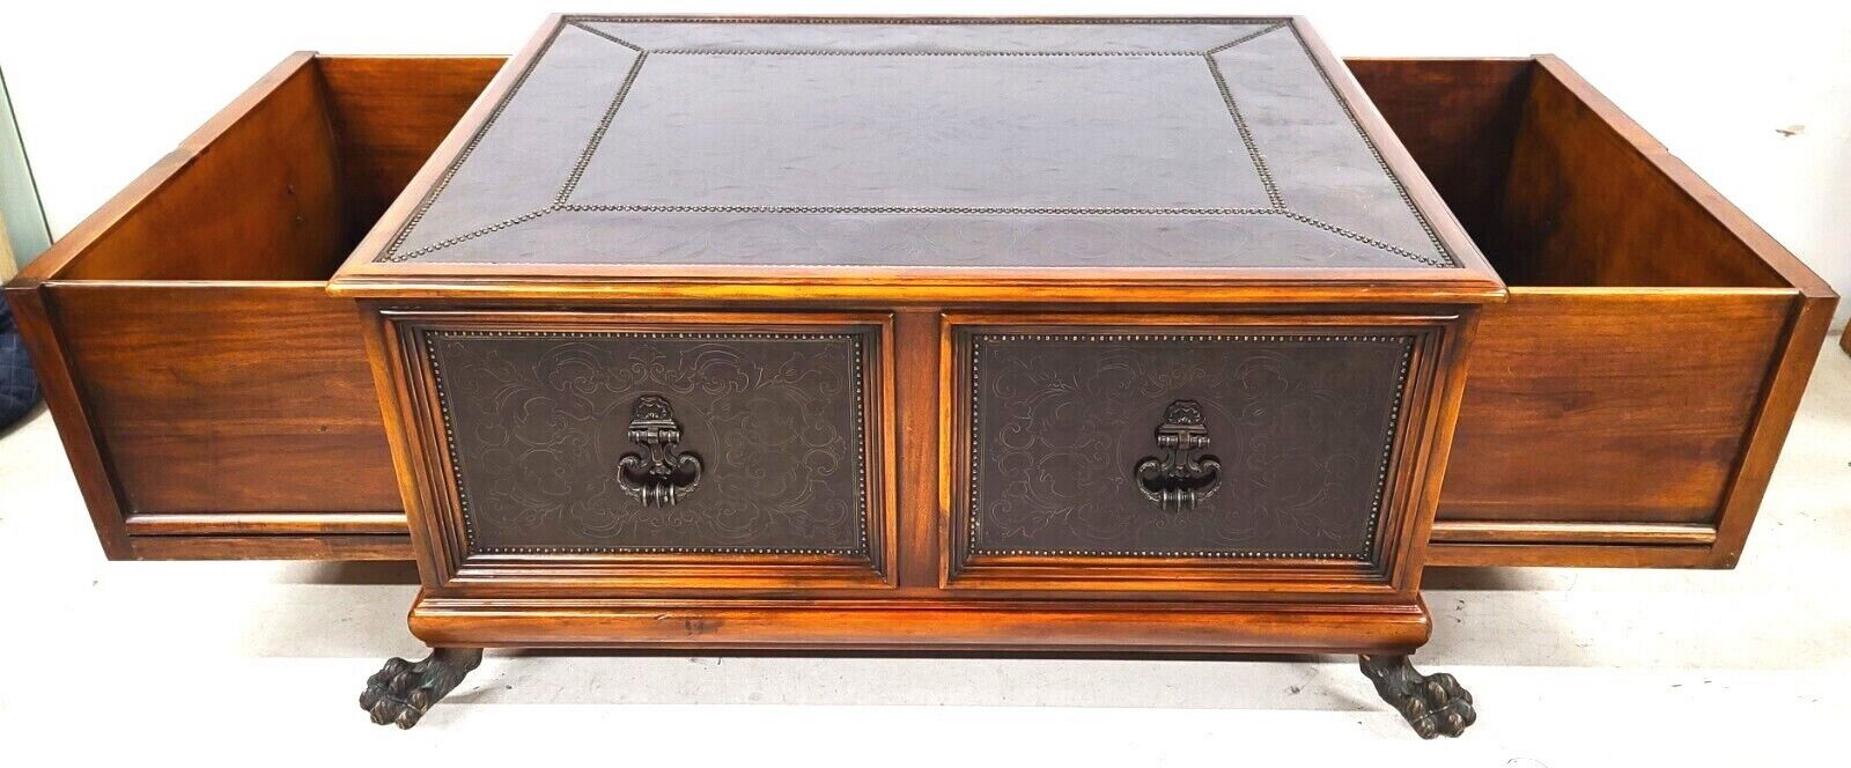 Offering One Of Our Recent Palm Beach Estate Fine Furniture Acquisitions Of A 
THEODORE ALEXANDER Armoury Collection William and Mary Style Etched Brass Cocktail Table
Featuring 2 large drawers on either side, studded etched brass floral and